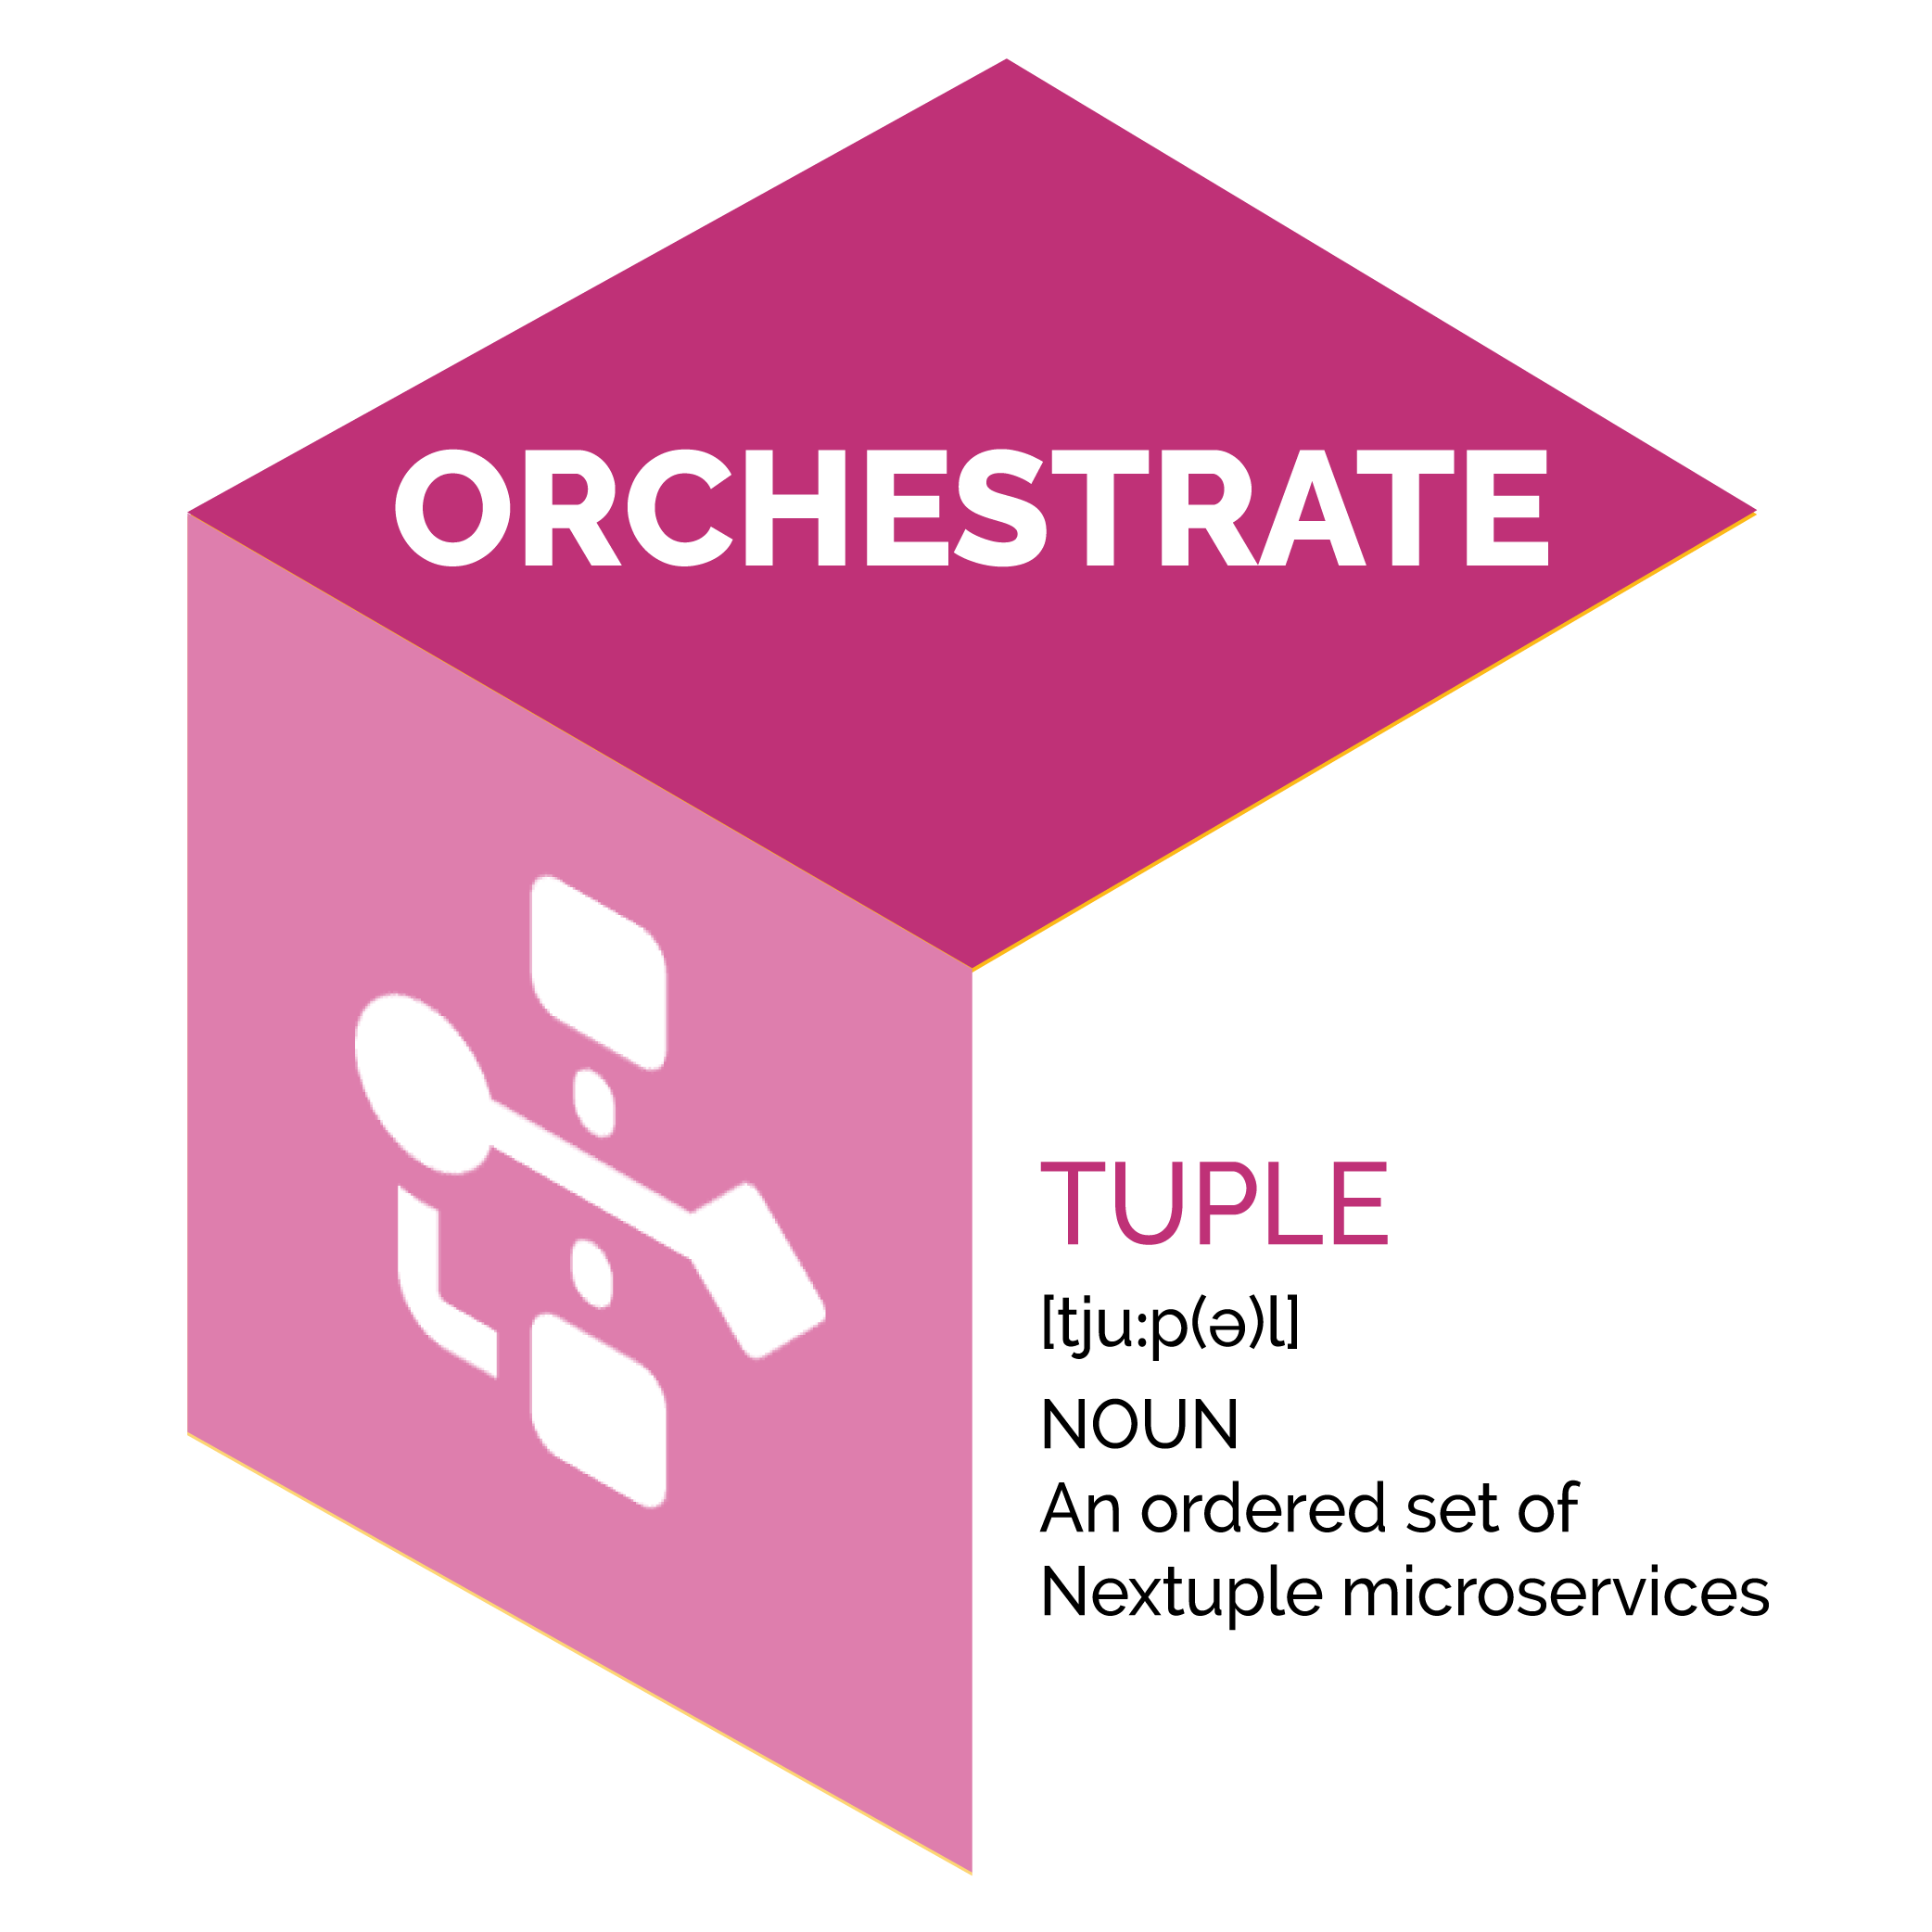 orchestrate tuple image definition